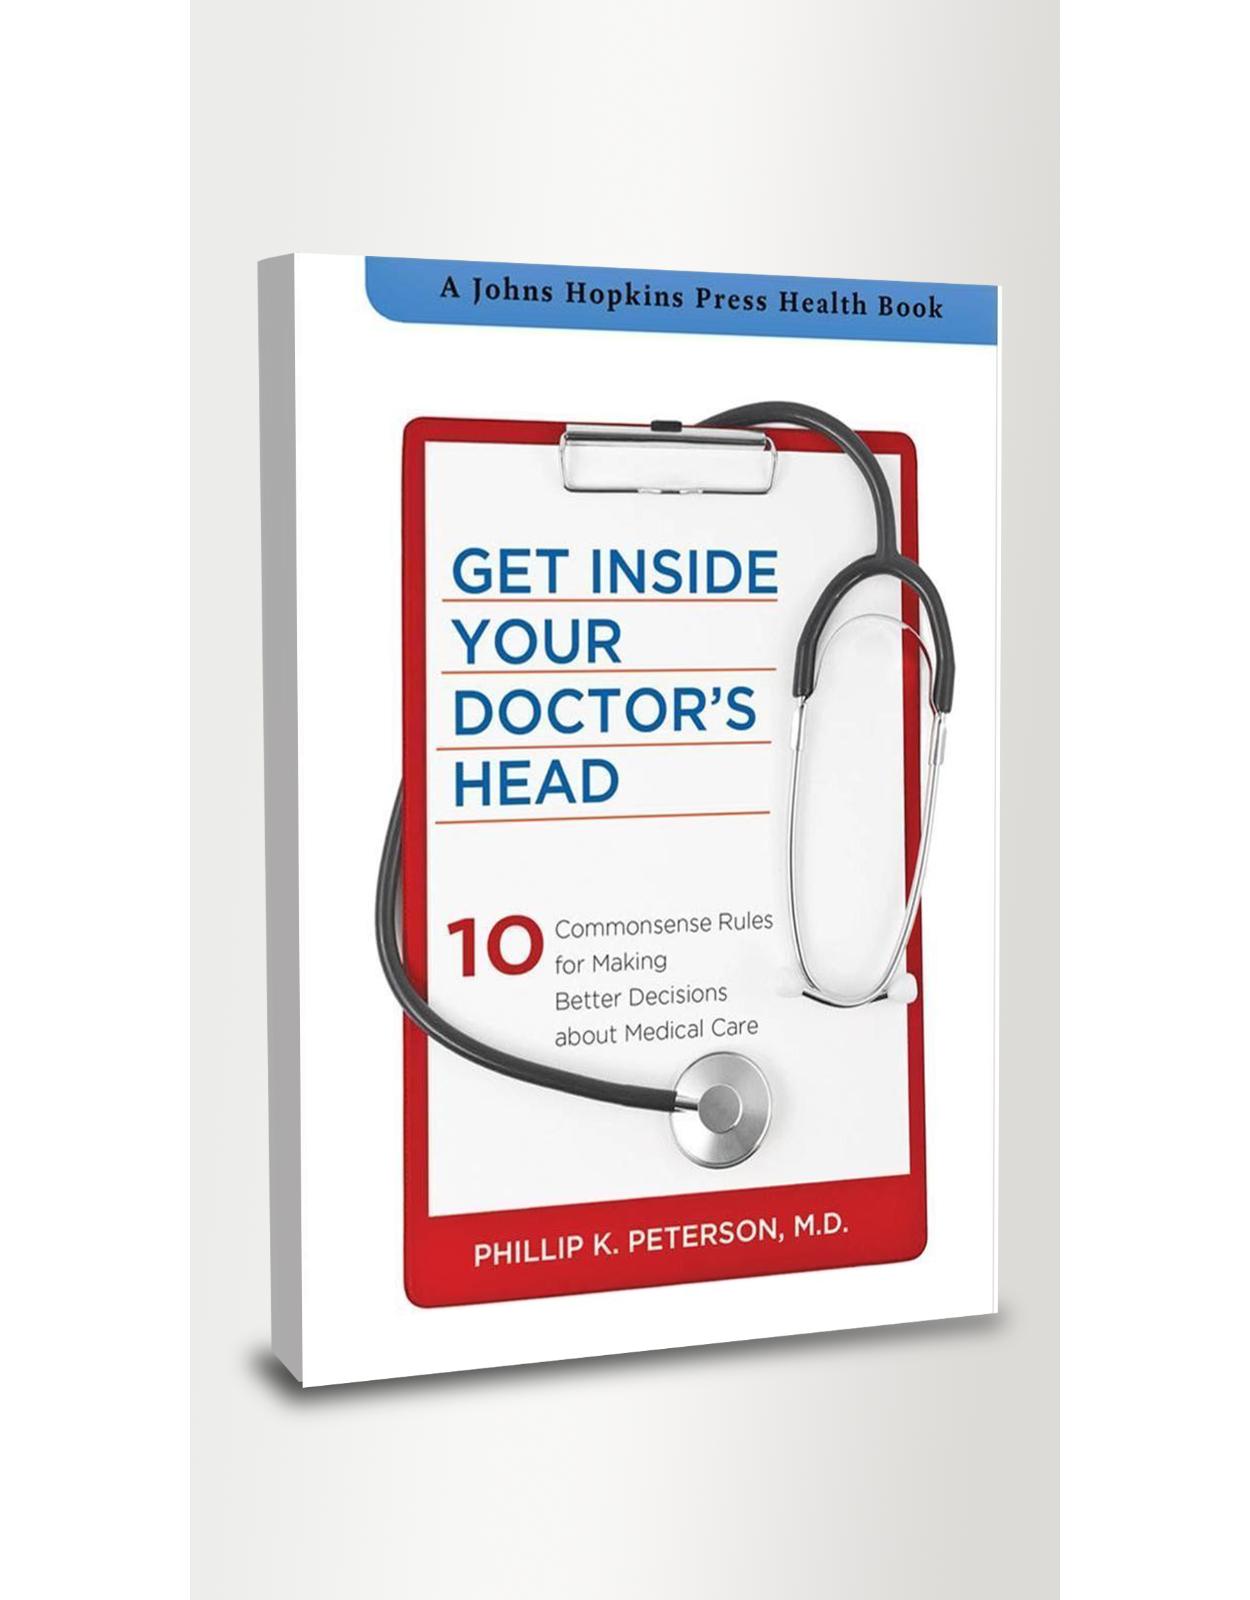 Get Inside Your Doctor's Head. Ten Commonsense Rules for Making Better Decisions about Medical Care